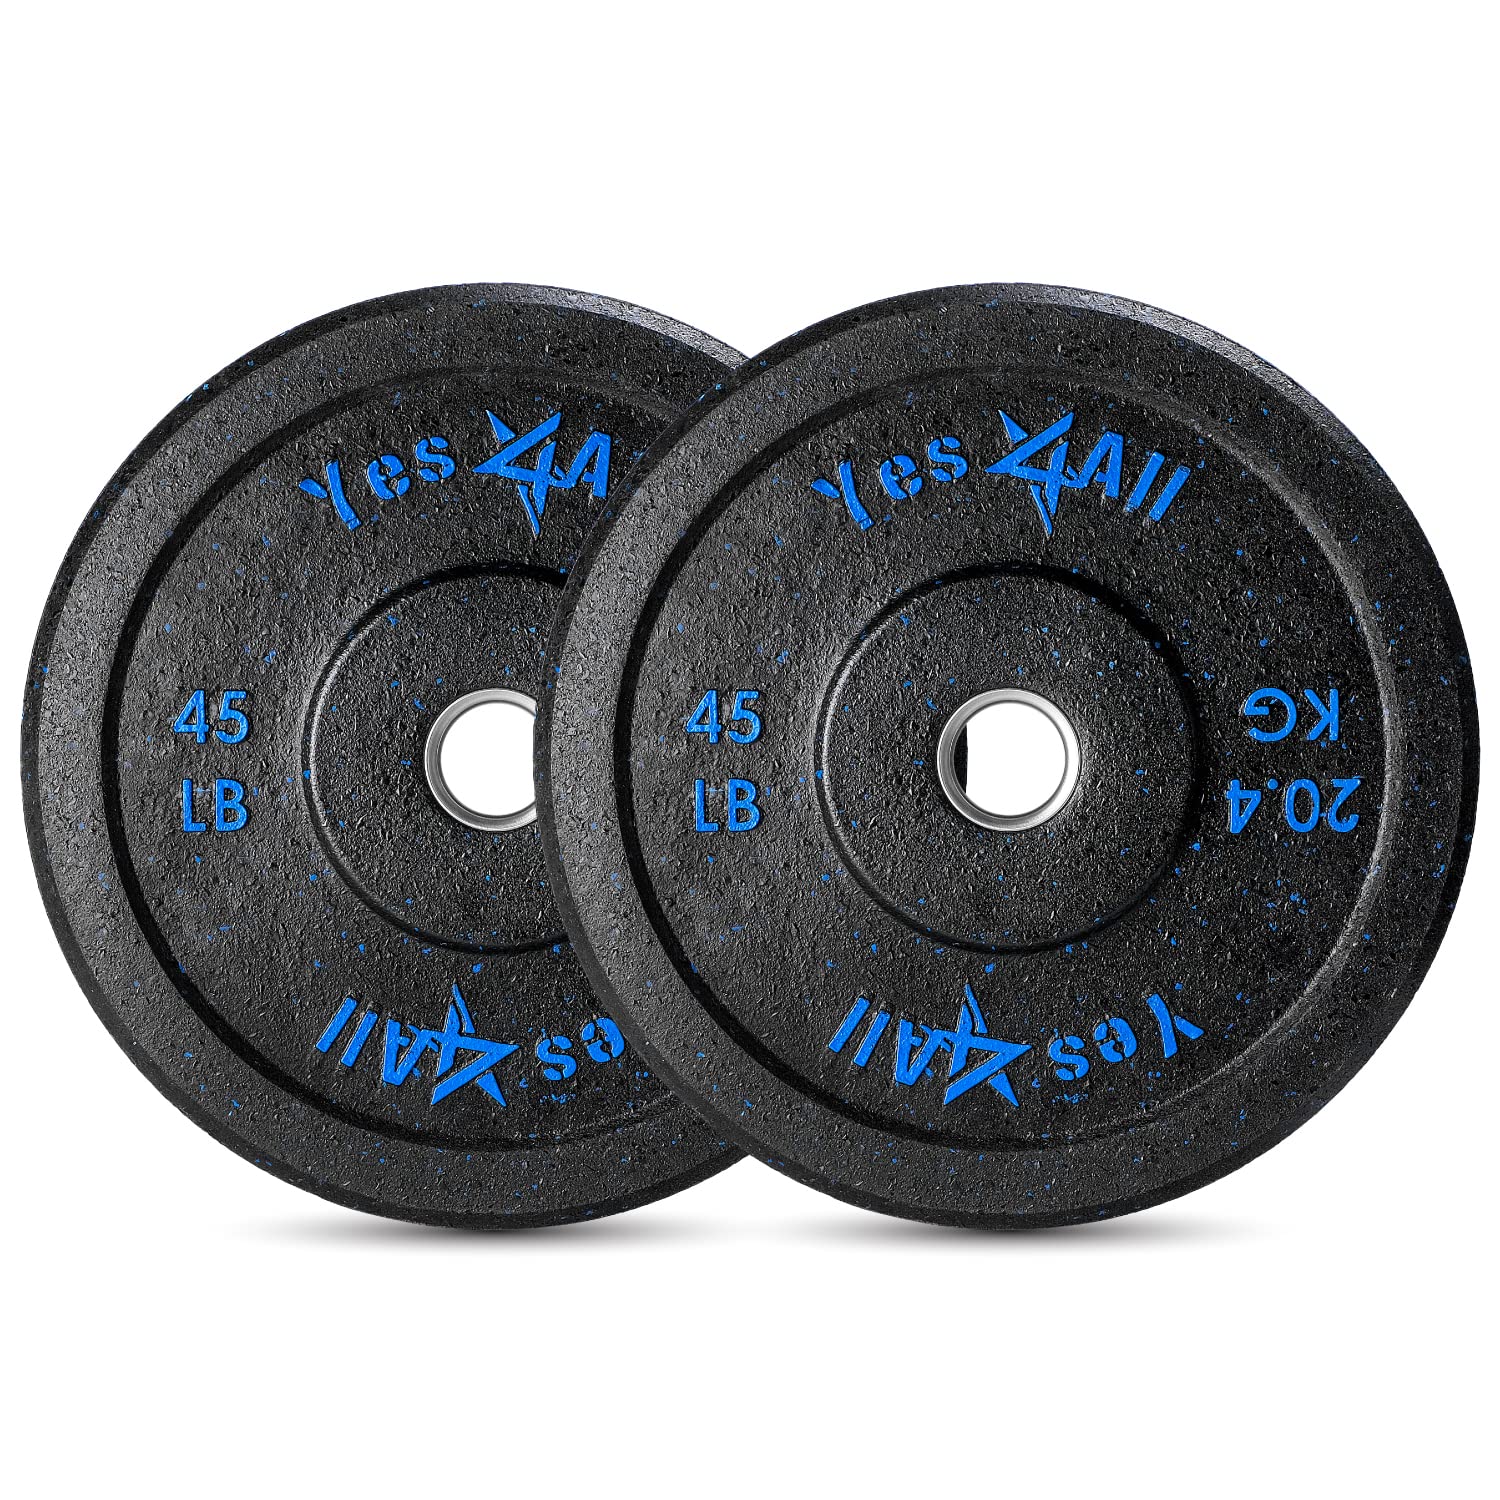 Yes4All 2 Inch Bumper Plate - Olympic Rubber Weight Plate for Weightlifting and Strength Training - Durable Rubber with Steel Hub - 45LB - Pair